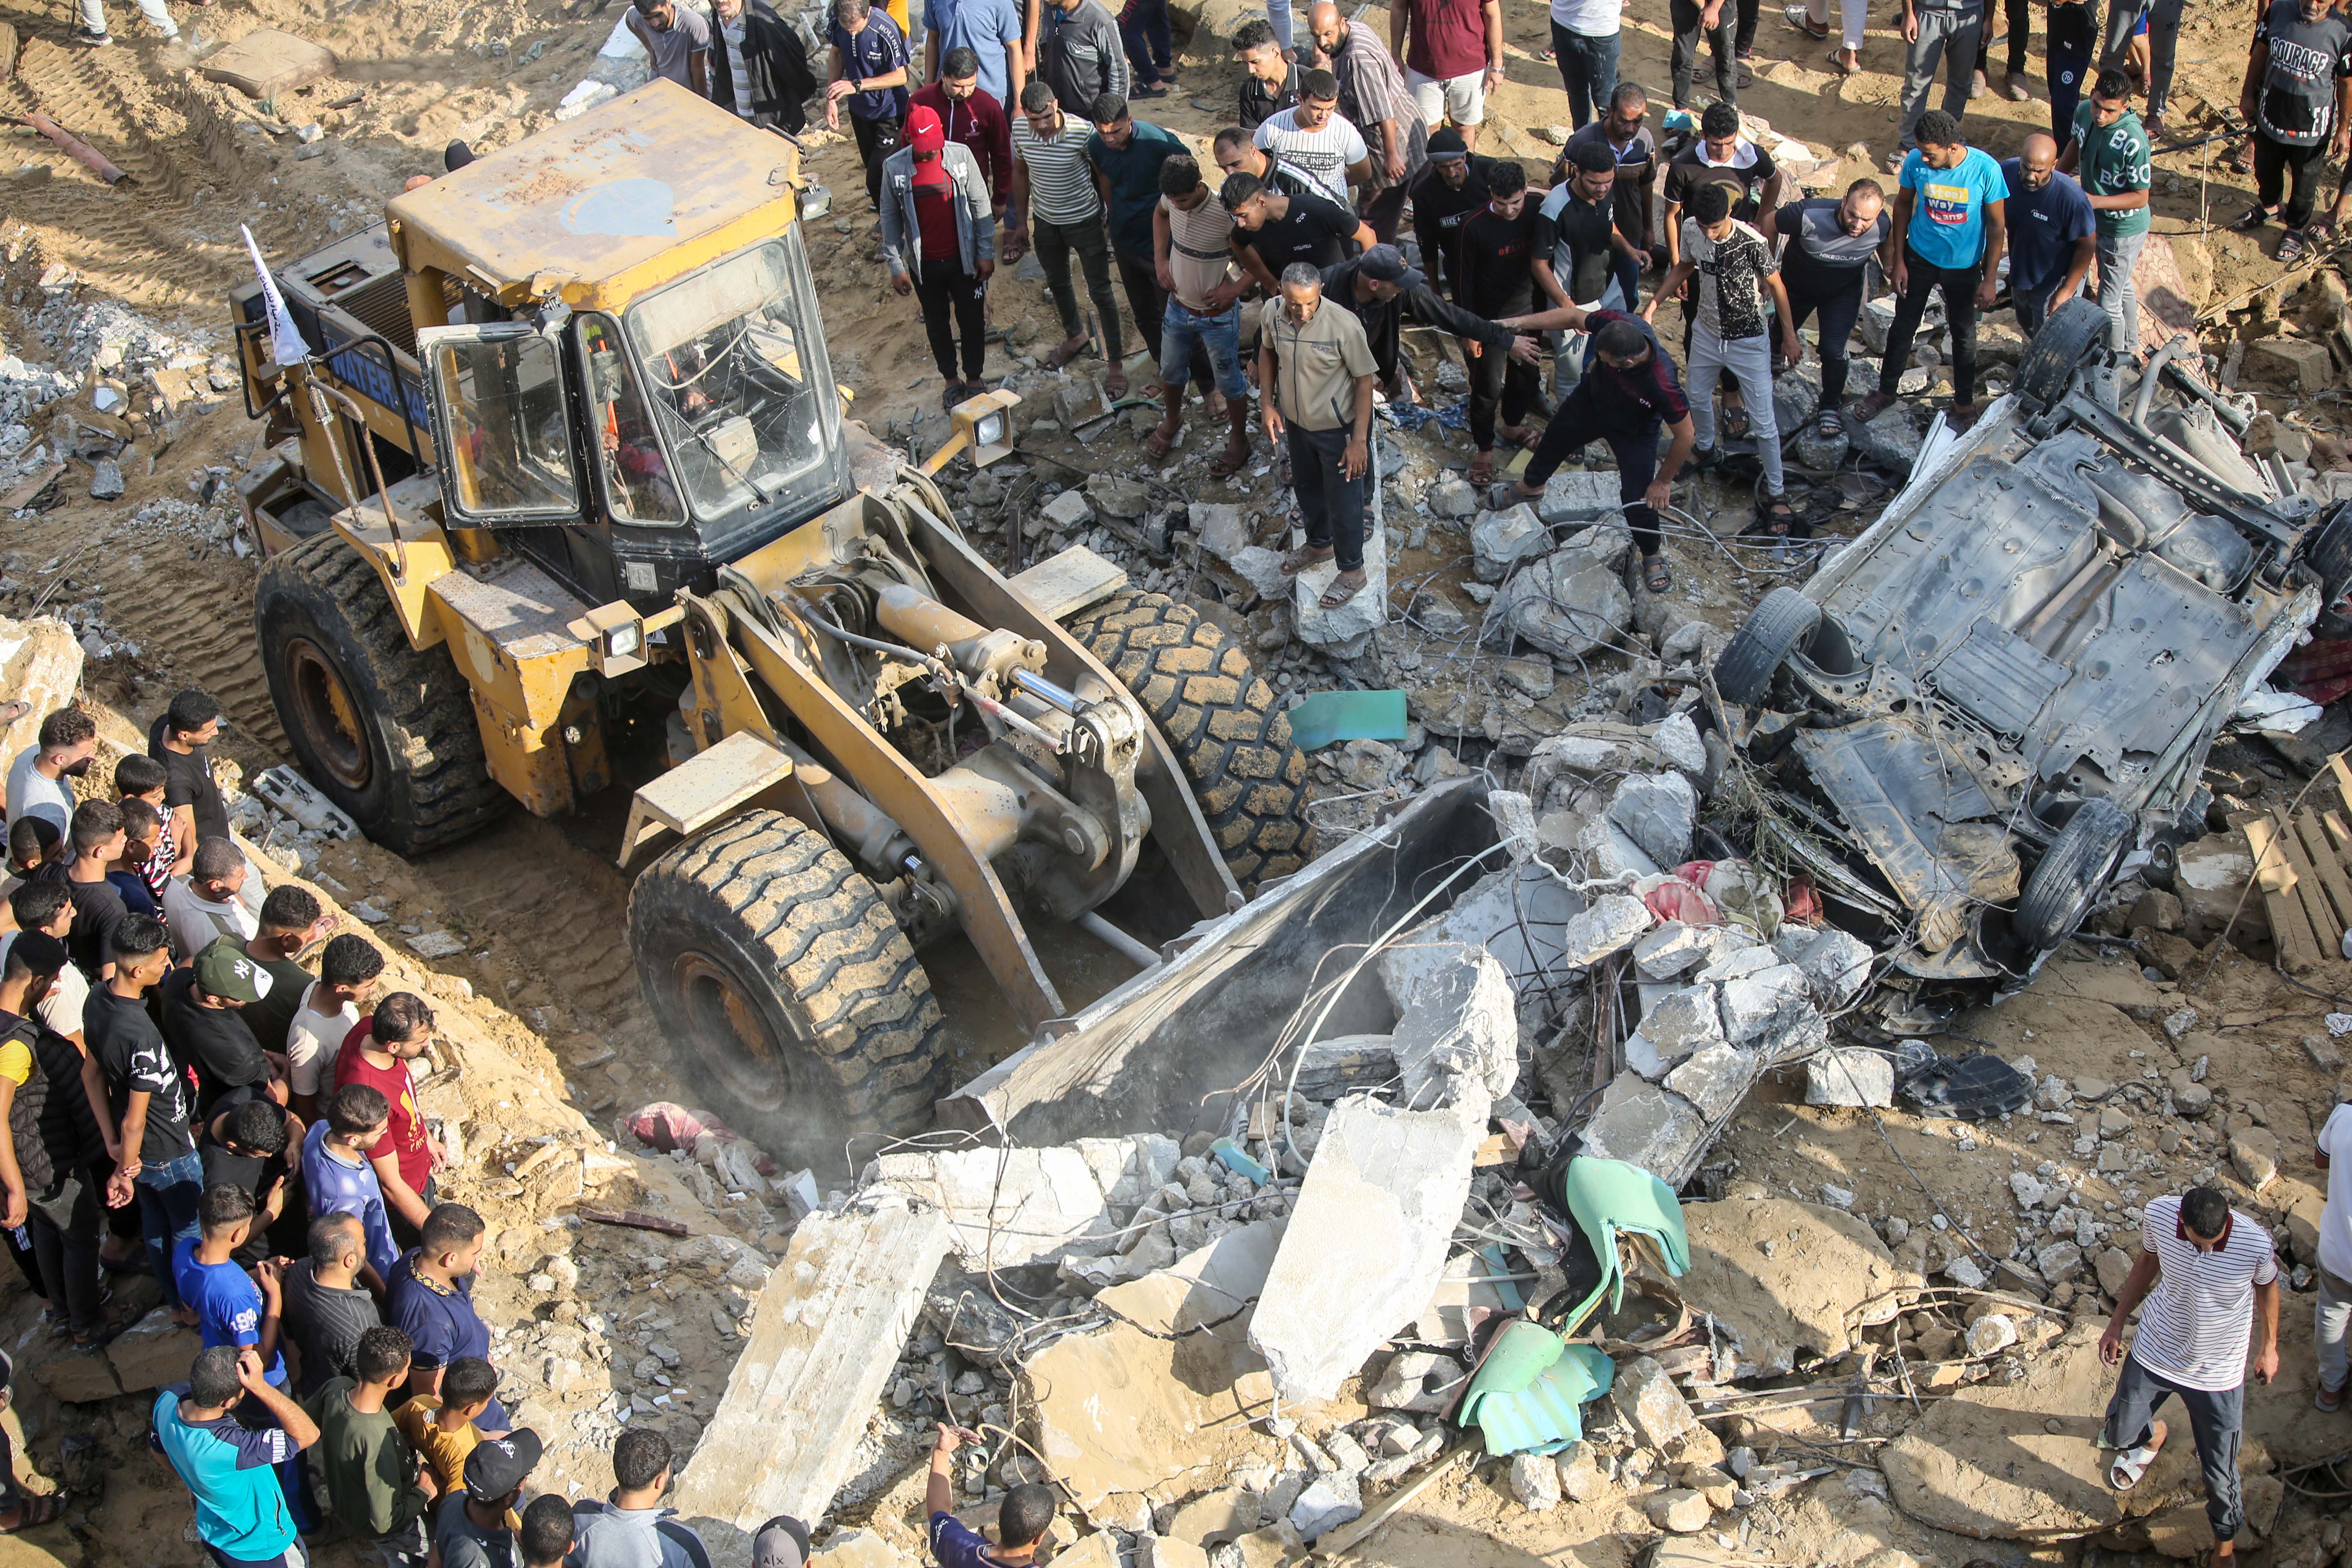 Palestinian citizens inspect what remains of their home, which was destroyed during Israeli raids on the southern Gaza Strip